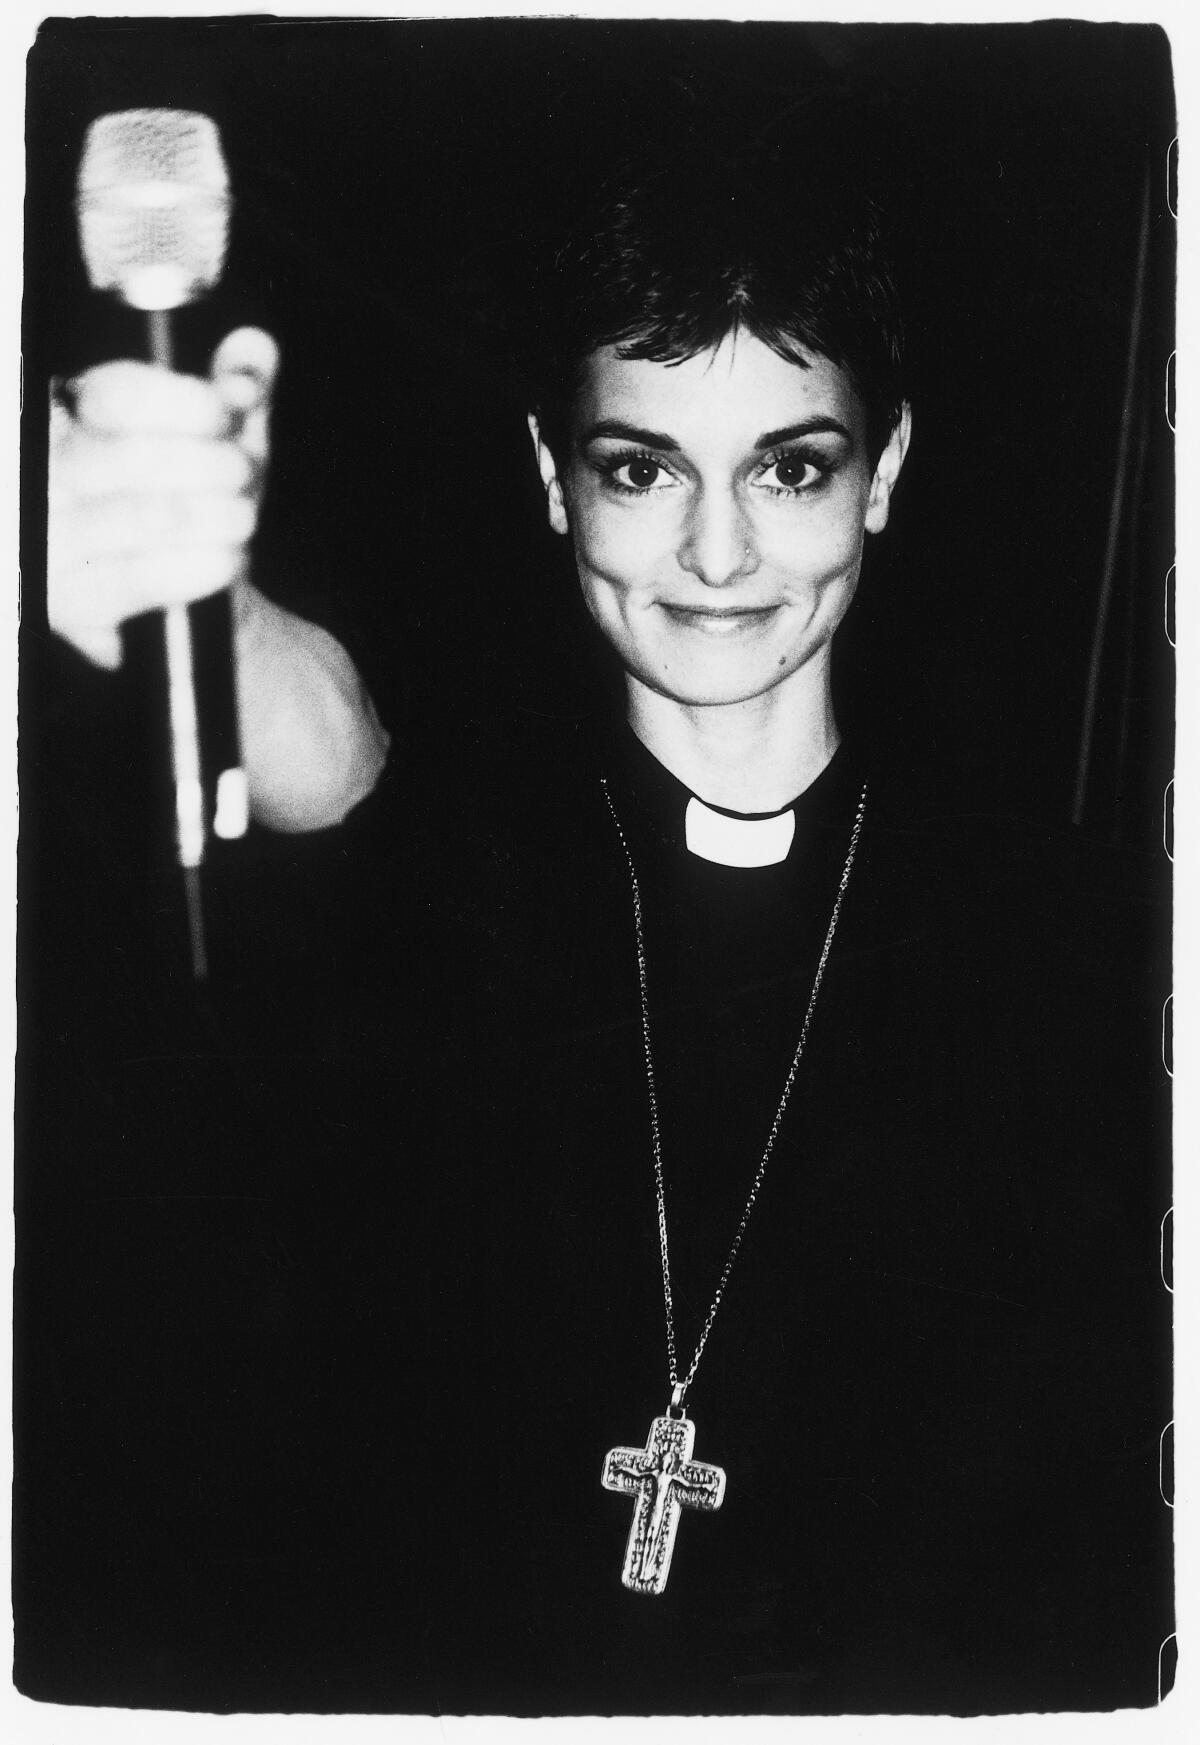 A vintage photo of Sinéad O'Connor wearing a priest's collar and crucifix.